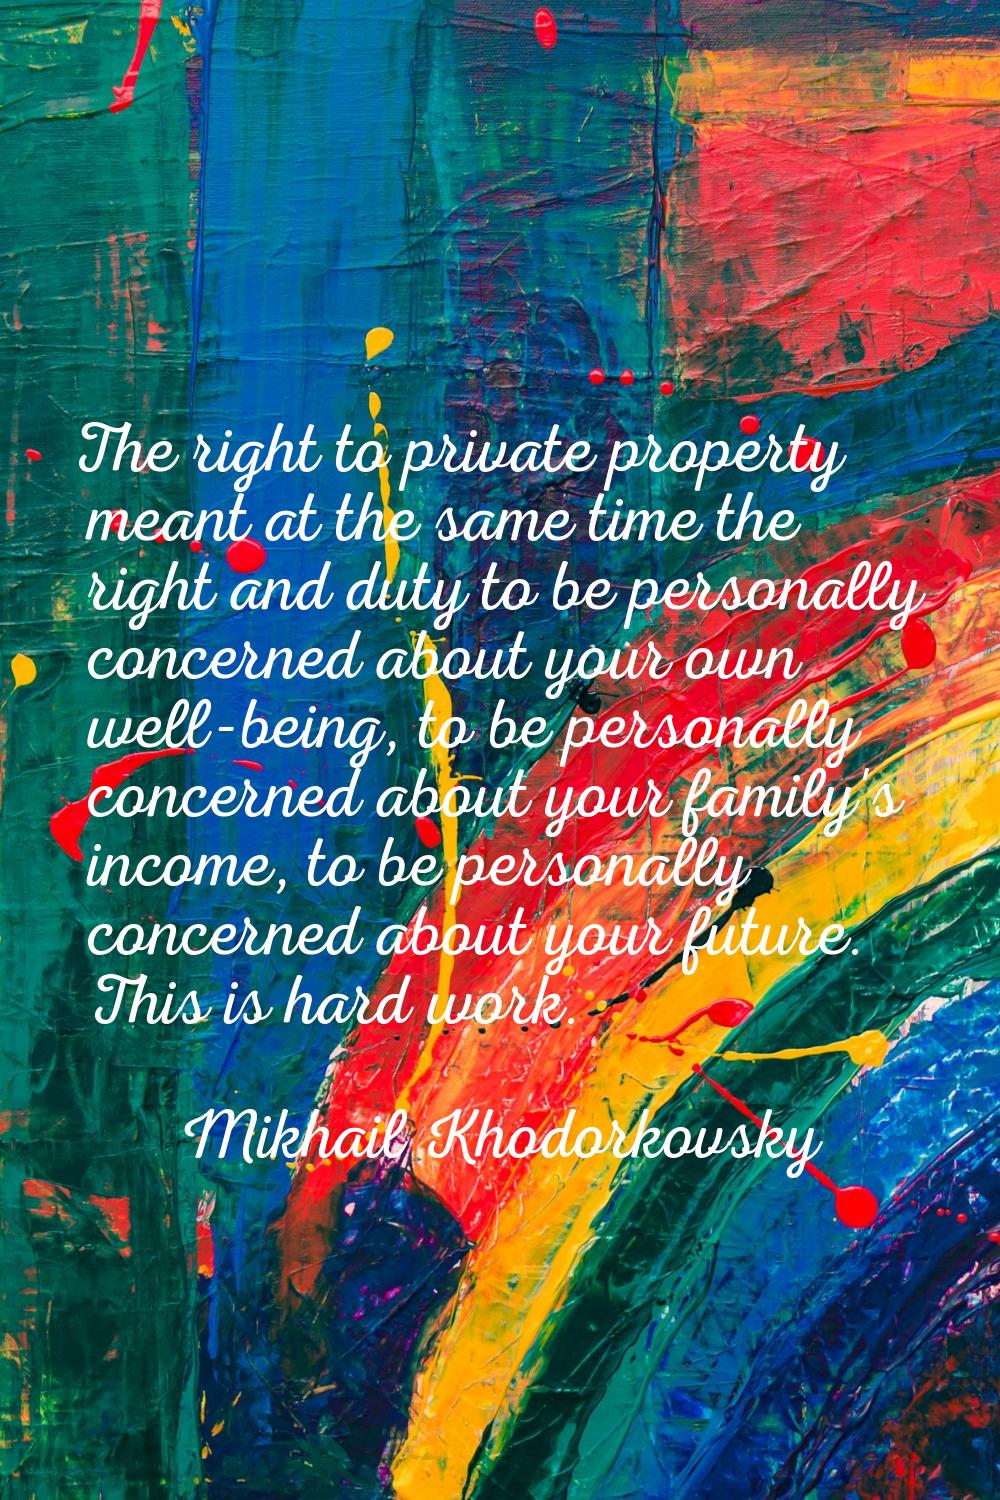 The right to private property meant at the same time the right and duty to be personally concerned 